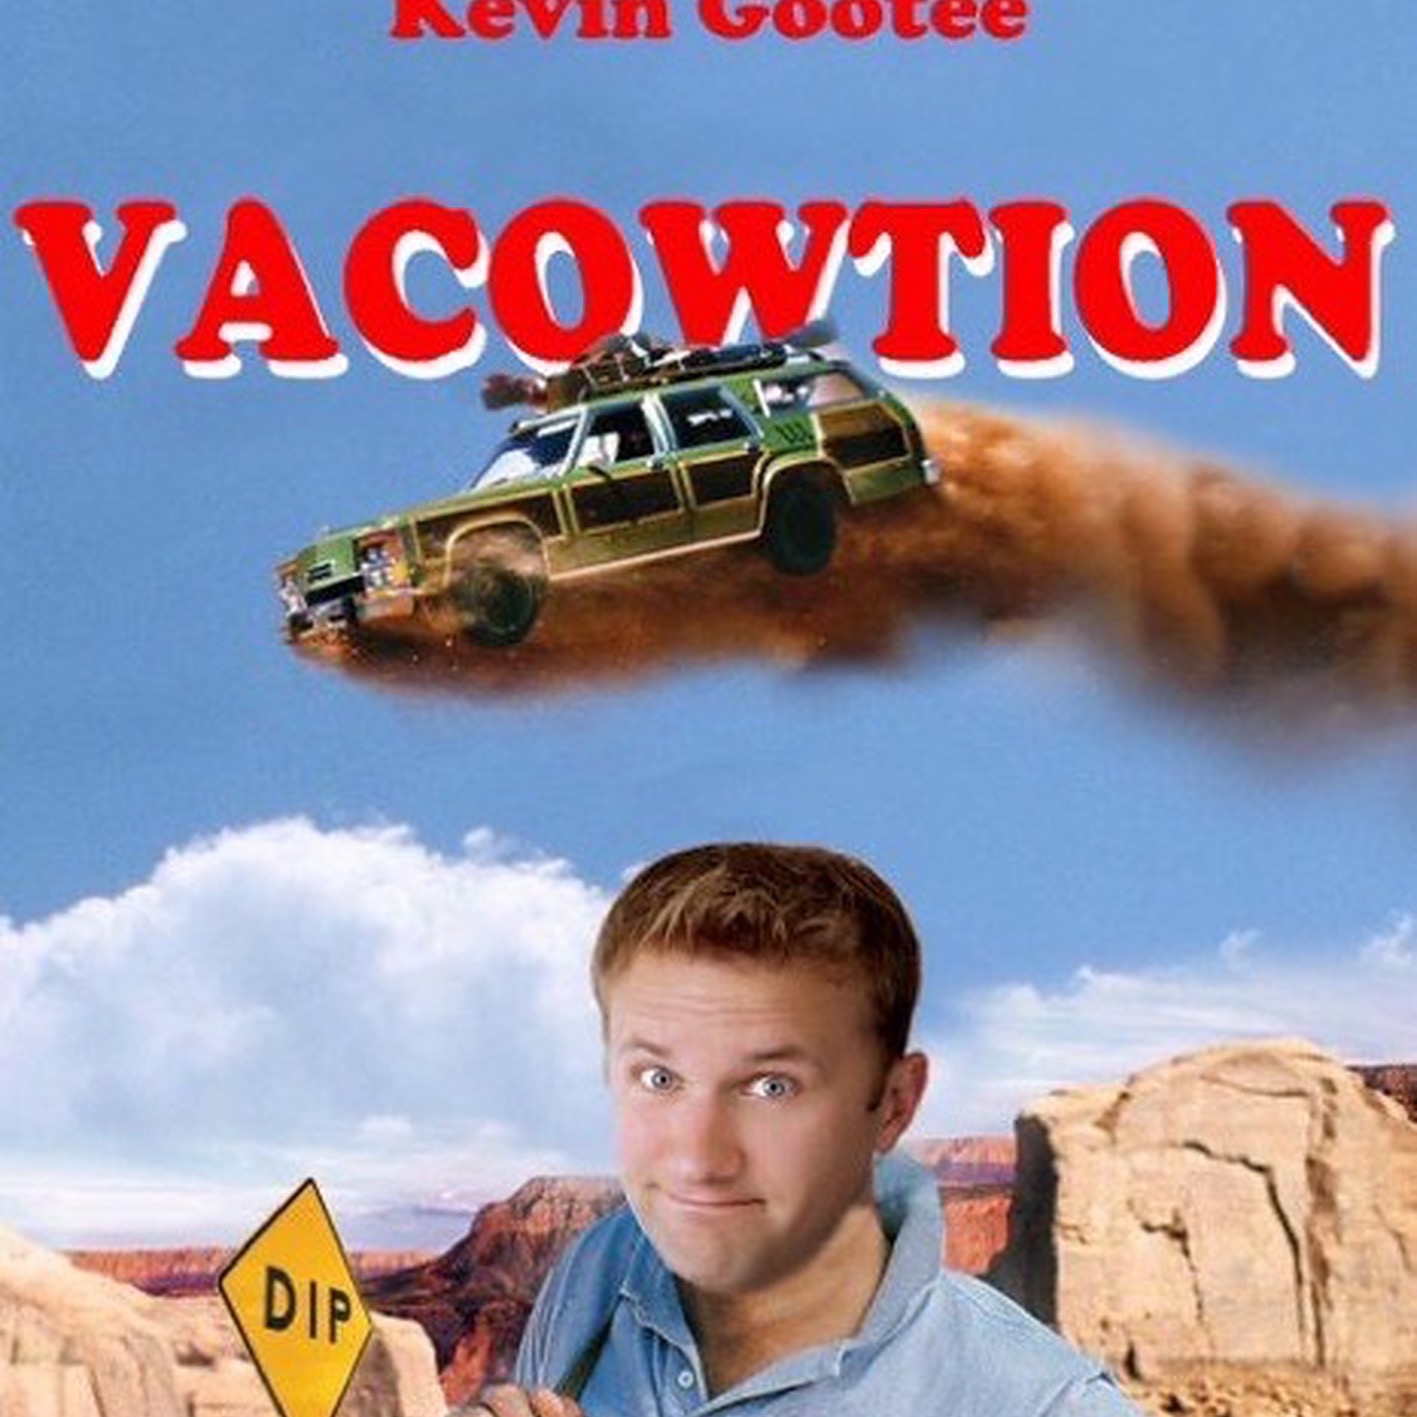 Kim Adragna REBOOKS National Lampoon's Vacation Episode 168 GTSC podcast